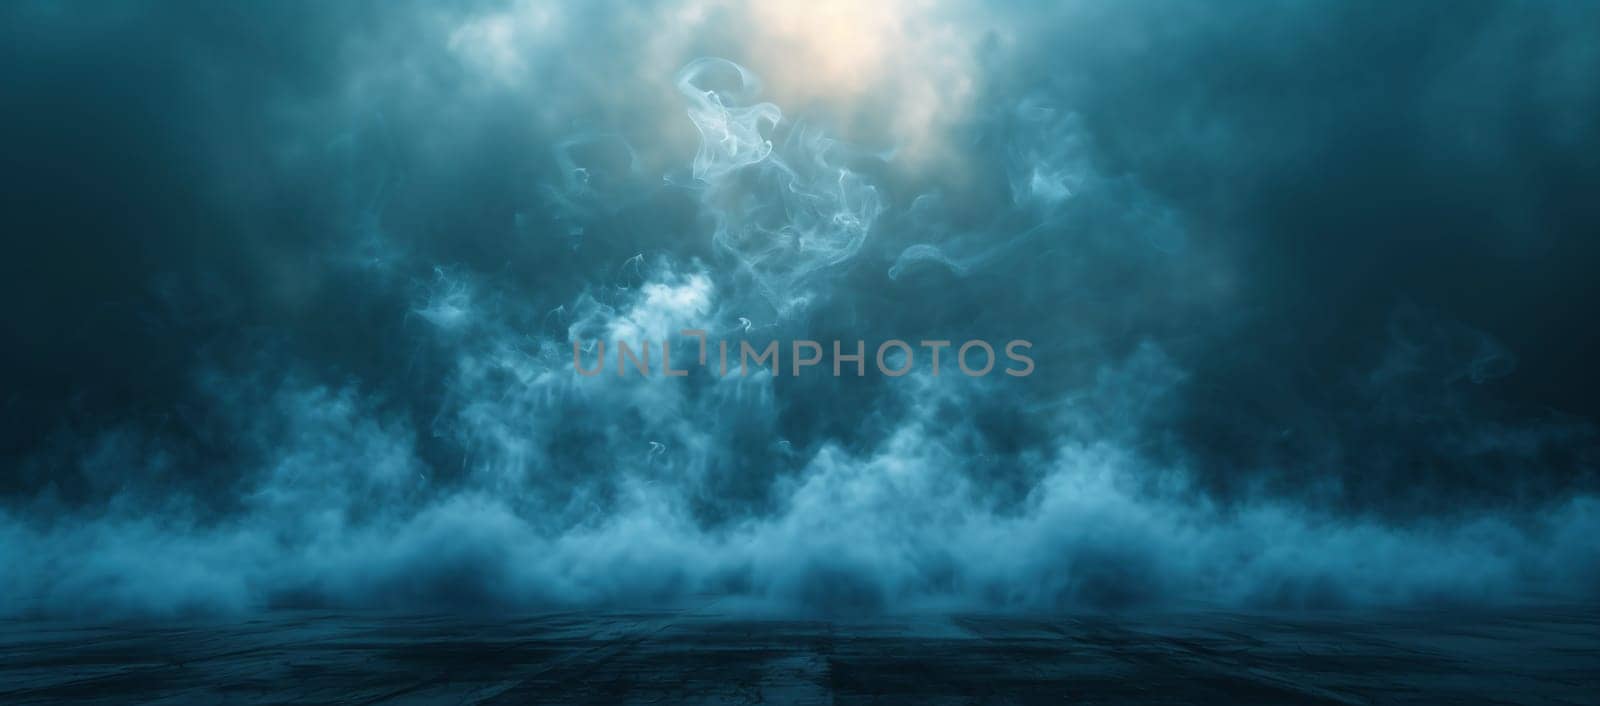 Epic sea background, storm in the sea. Digital illustration, digital painting. High quality photo